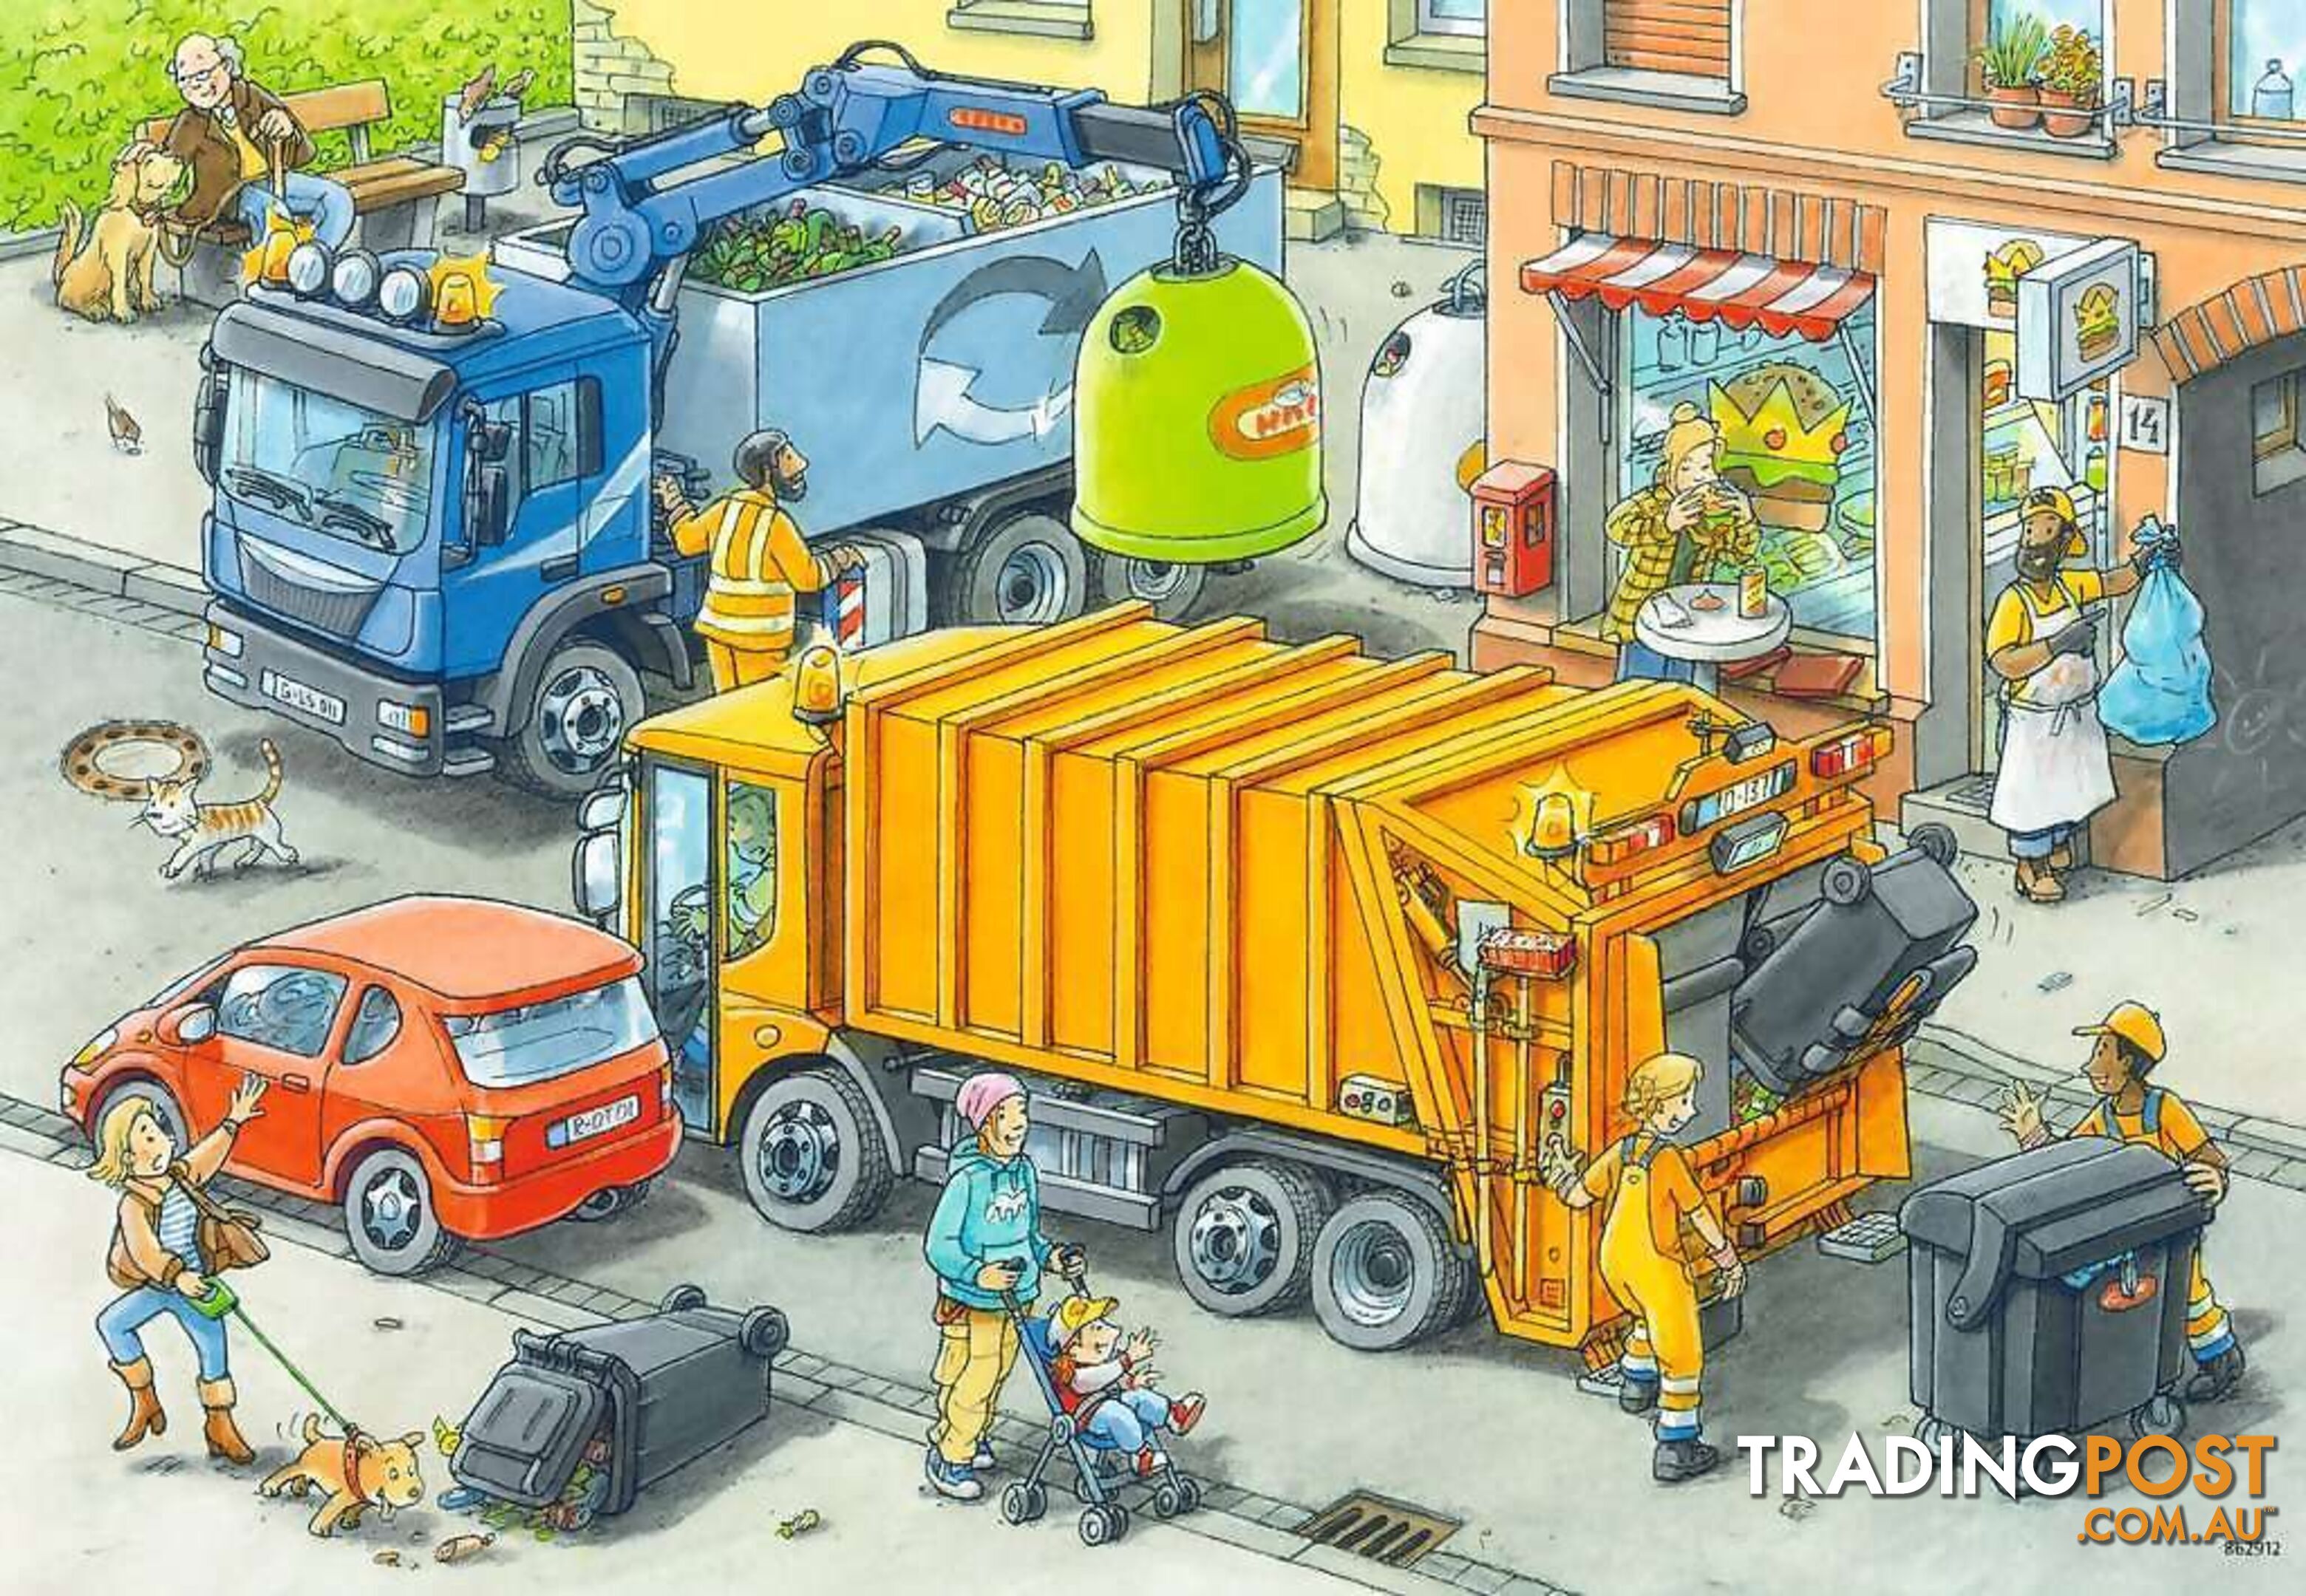 Ravensburger - Working Trucks Garbage Truck And Tow Truck Jigsaw Puzzle 2 X 24pc - Mdrb05096 - 4005556050963